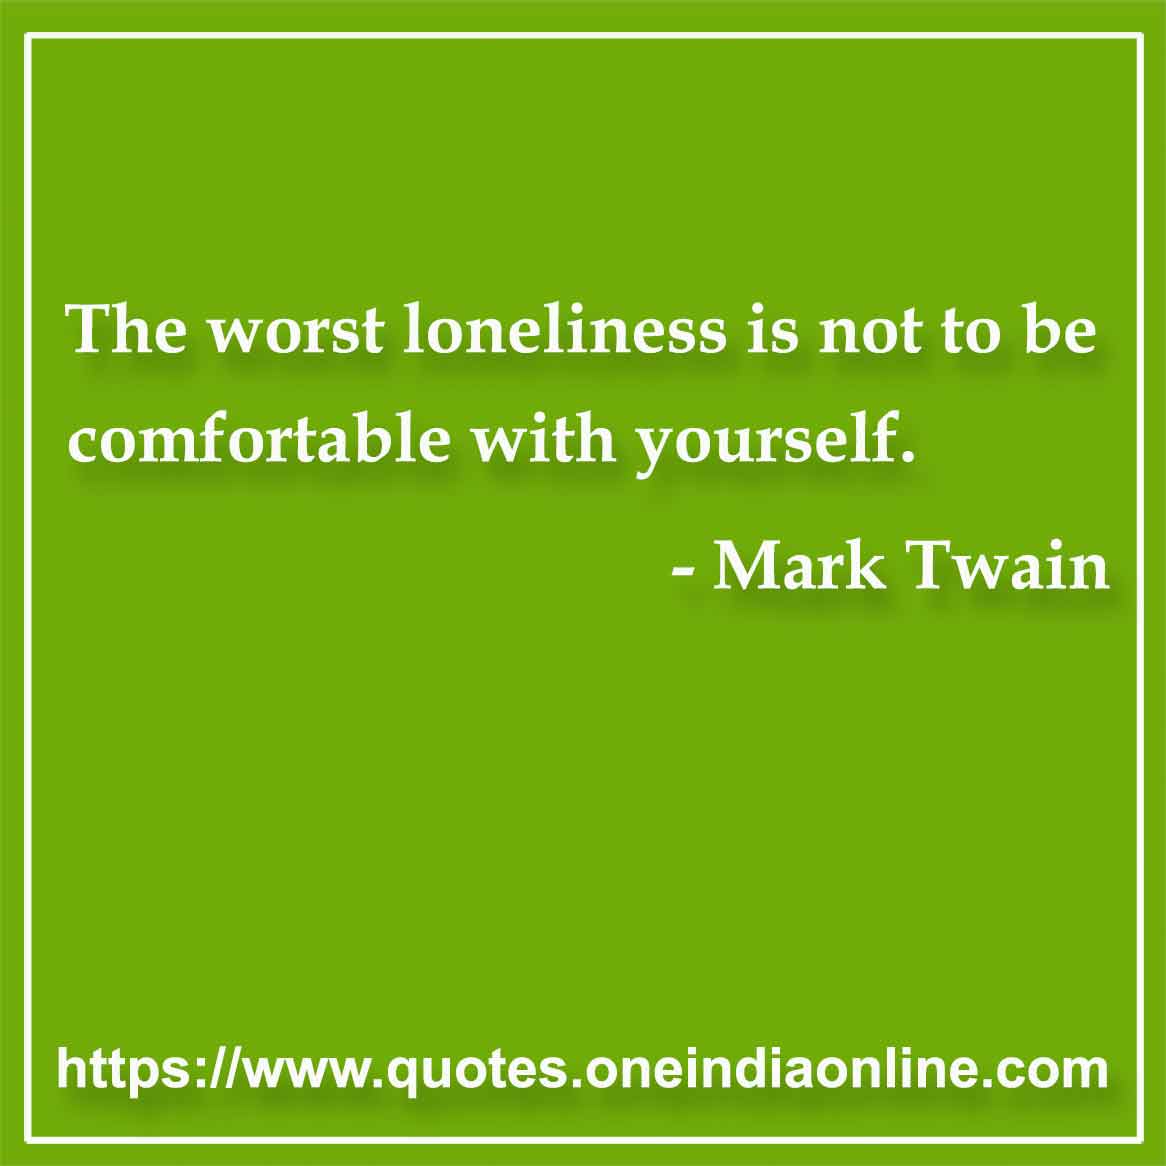 The worst loneliness is not to be comfortable with yourself.

- Loneliness Quotes by Mark Twain